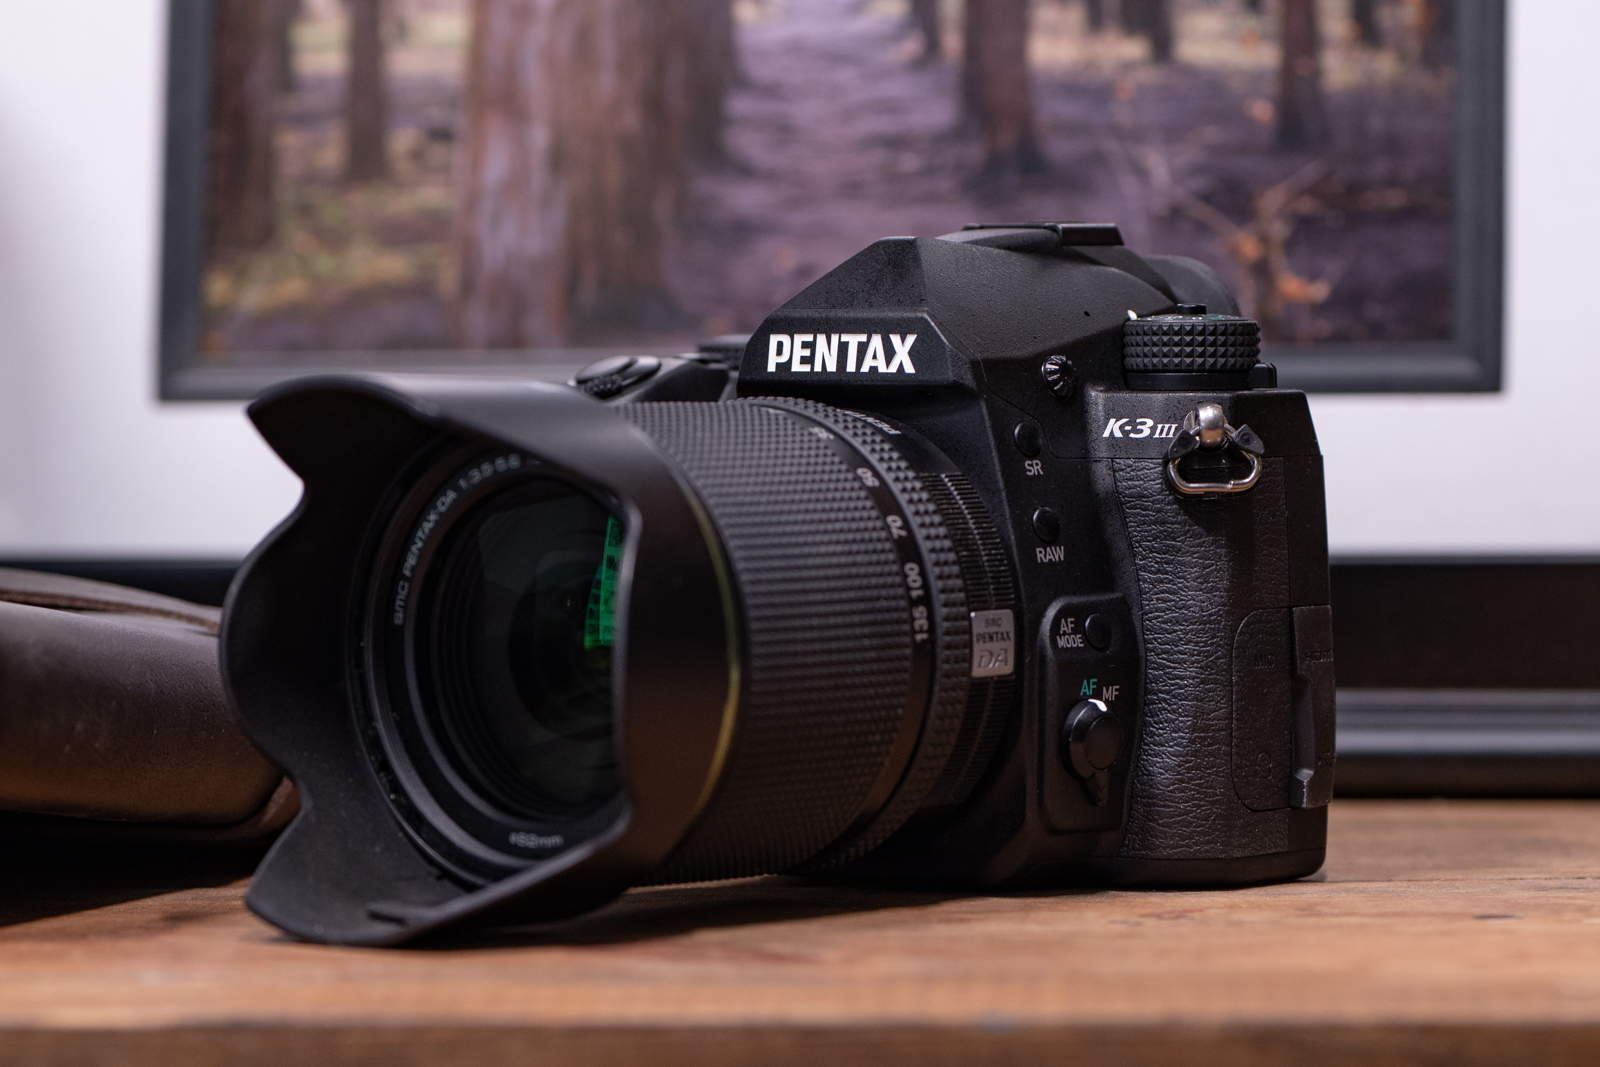 Pentax K3 III Review: A superb DSLR that too